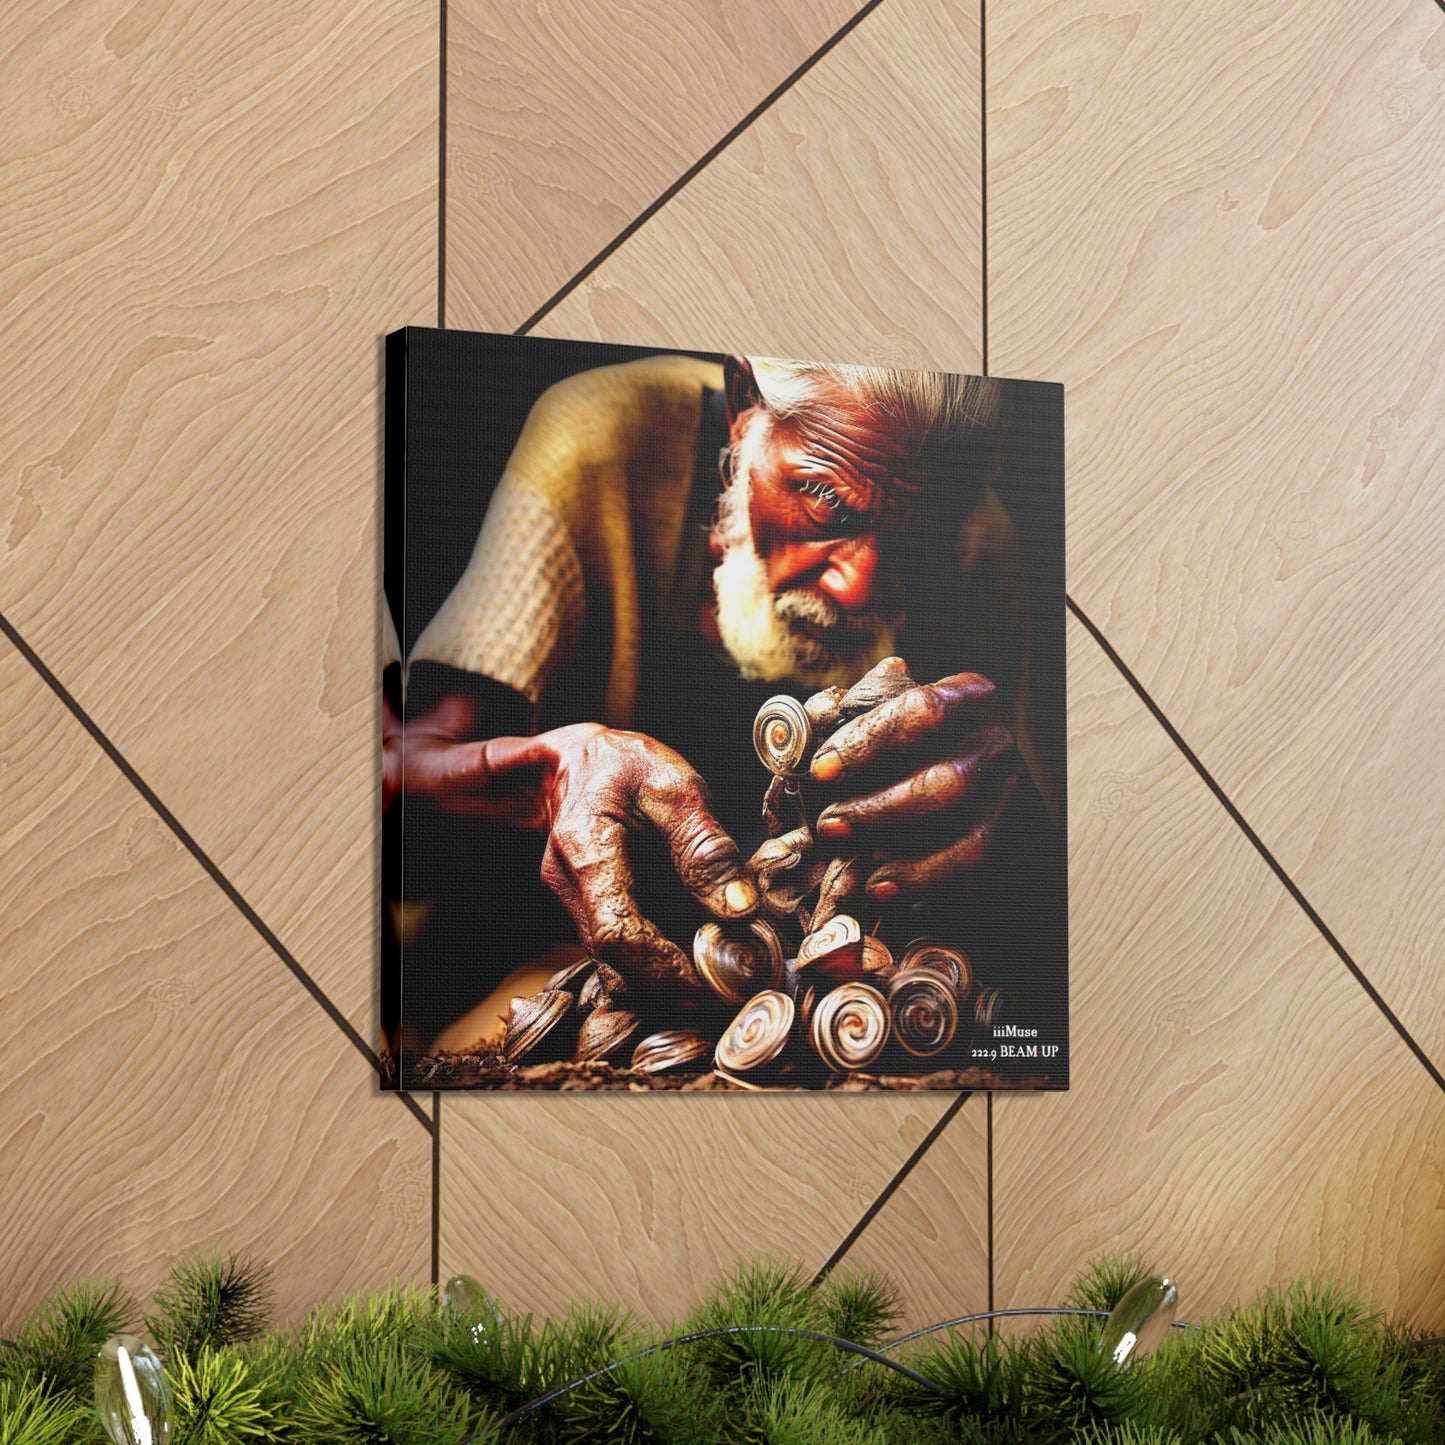 Obatala in Real Time 2- A Gallery Canvas